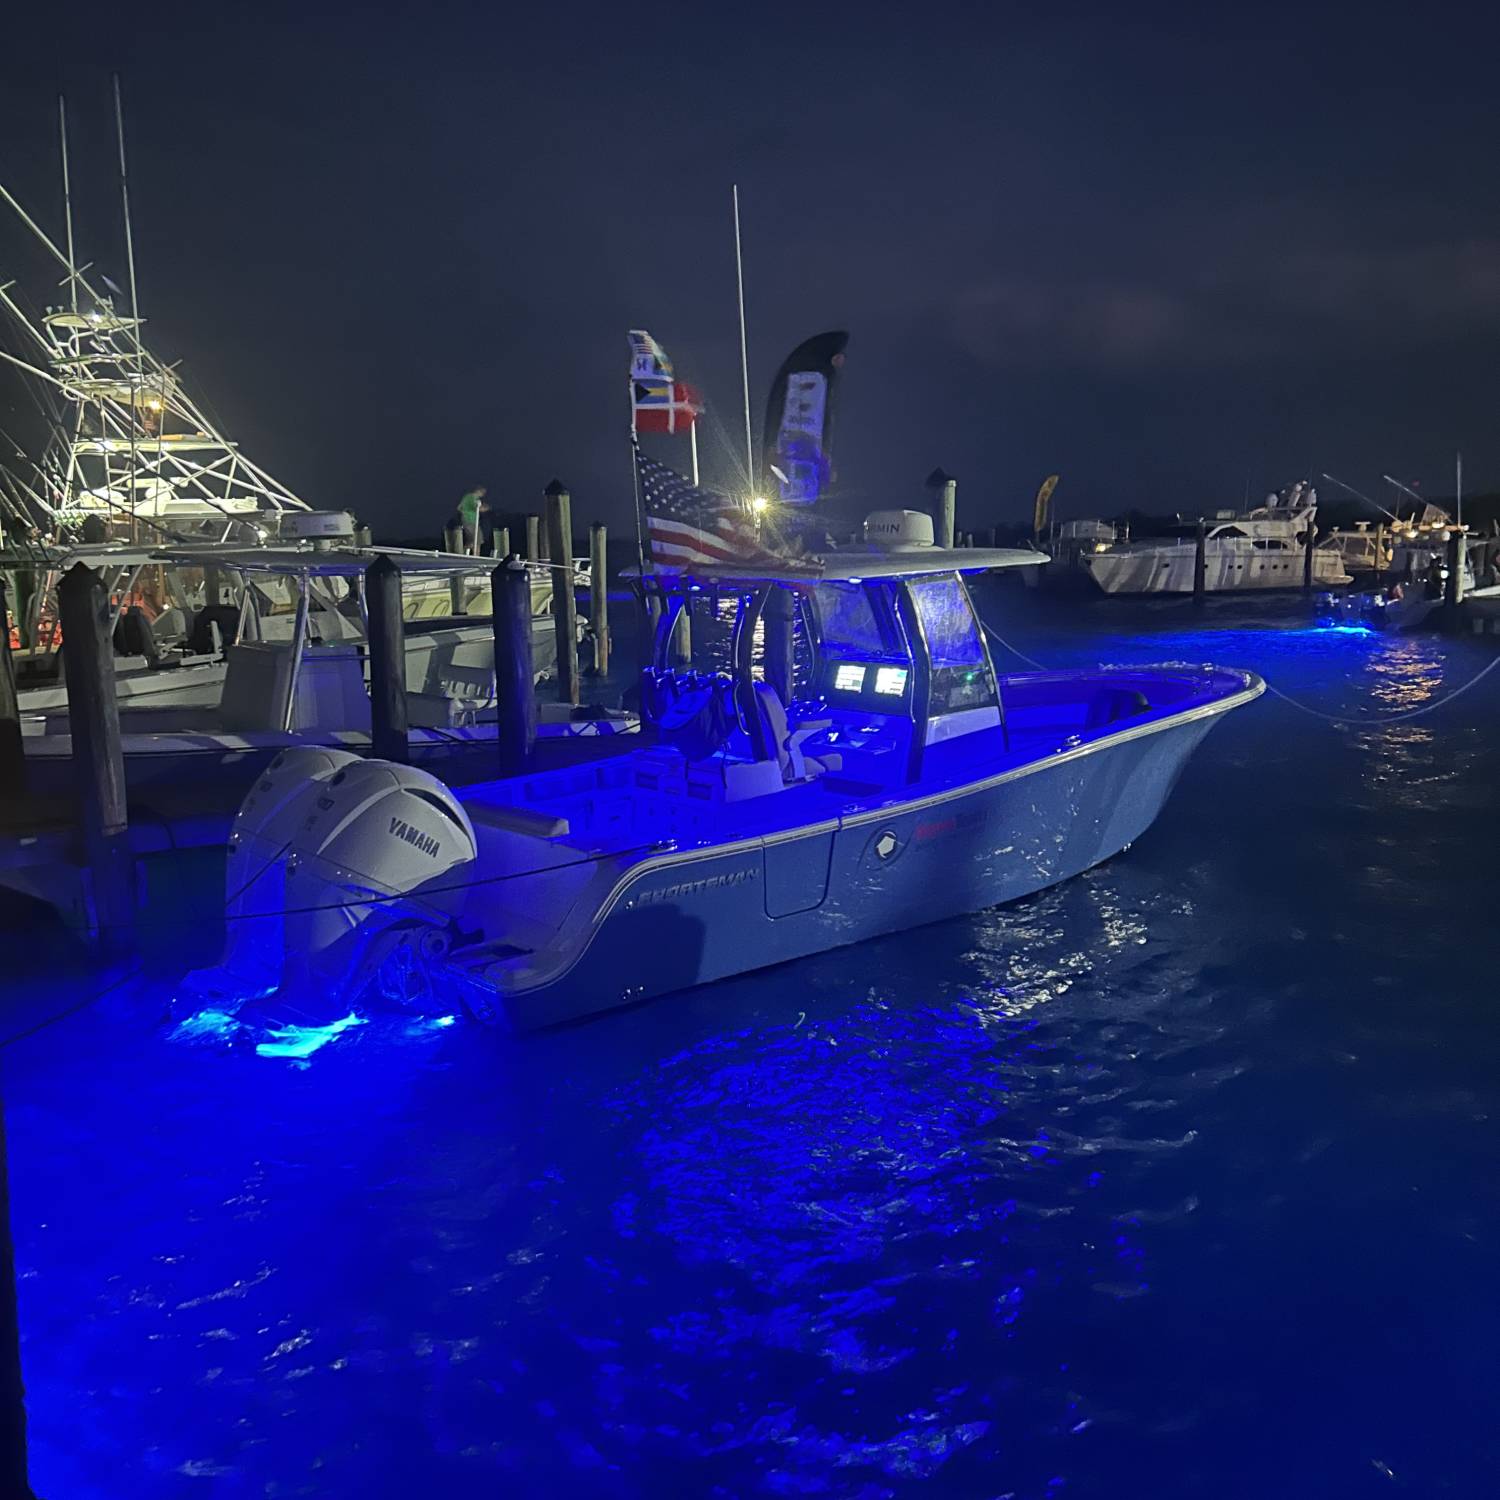 Title: Time Bandit - On board their Sportsman Open 282 Center Console - Location: Bimini Bahamas. Participating in the Photo Contest #SportsmanJuly2024